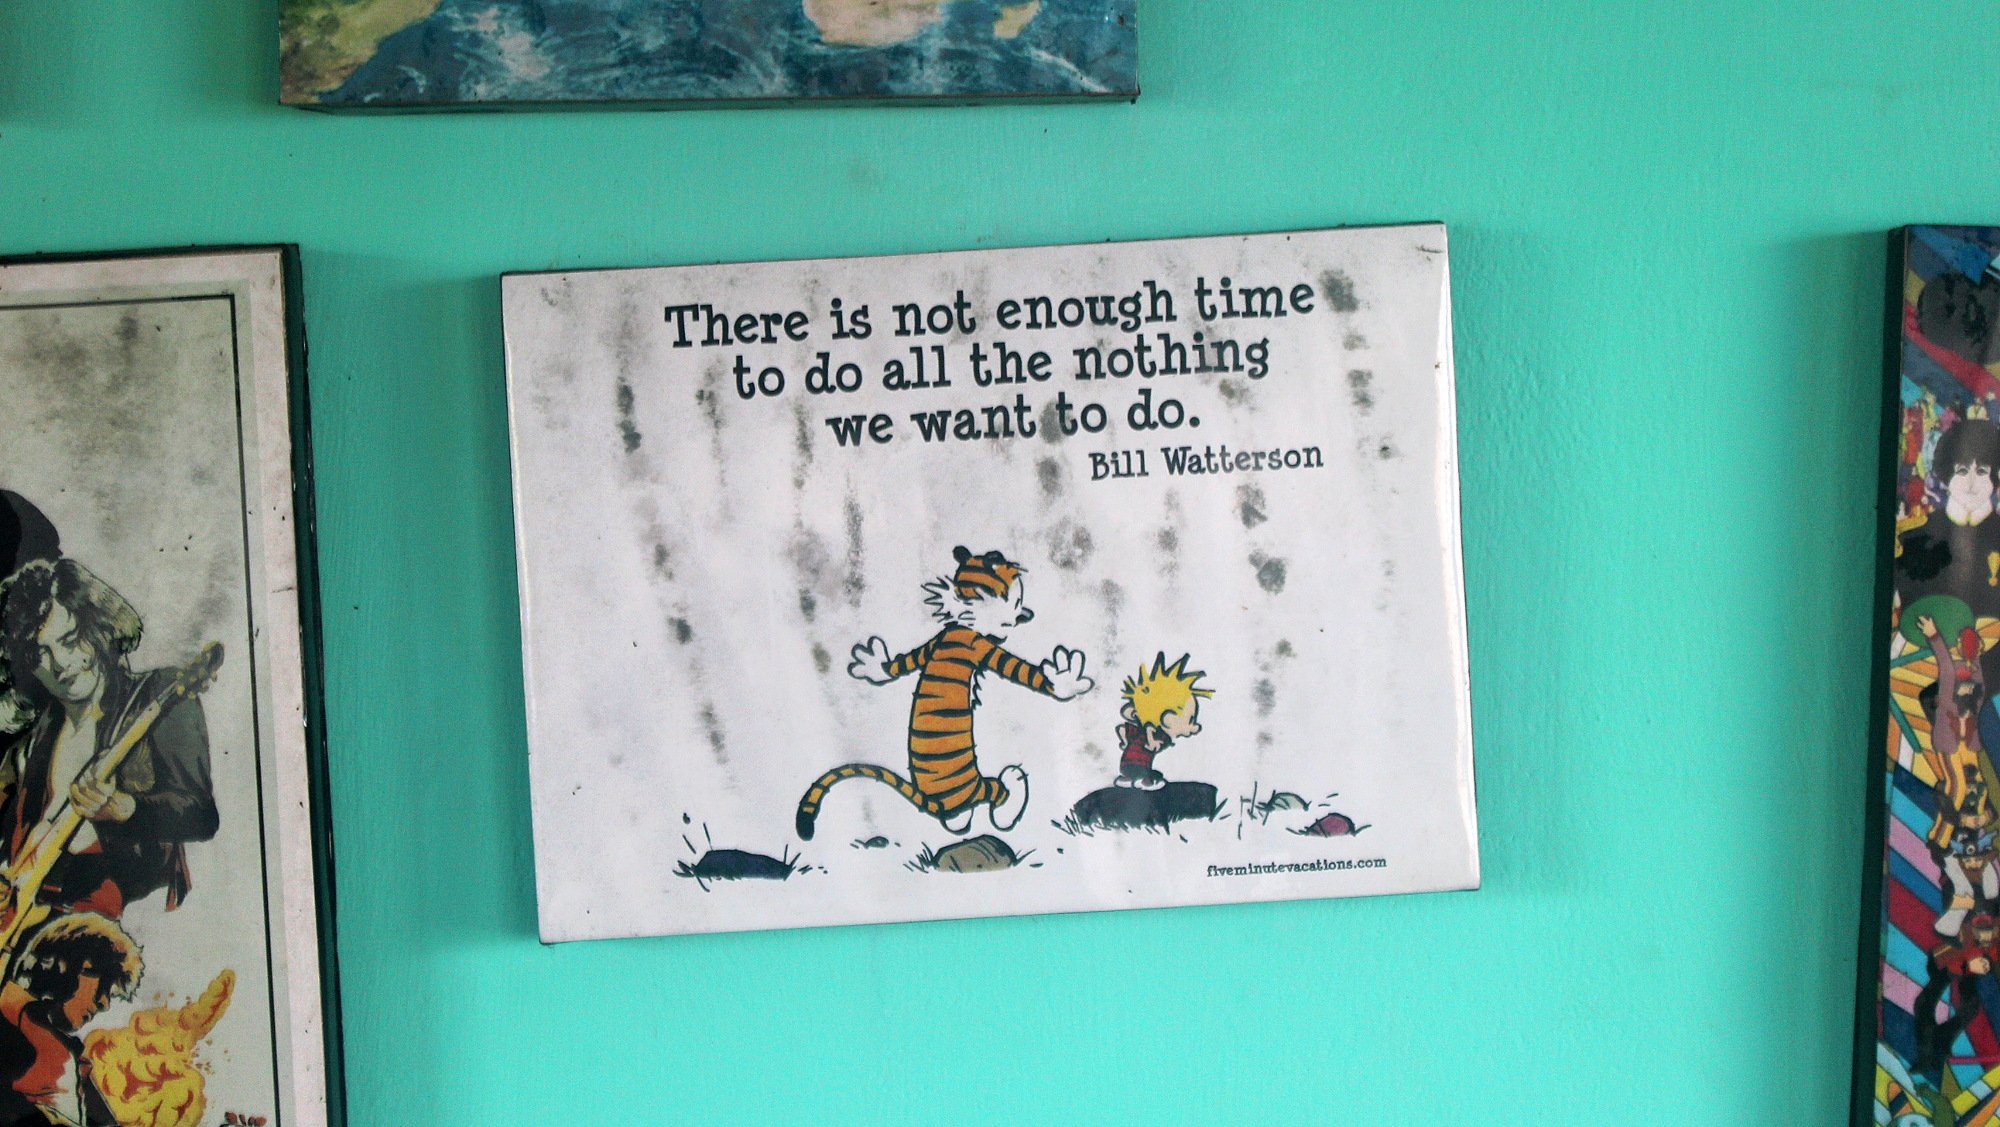 A Calvin & Hobbes print at the wall of the hostel Zostel Gokarna's with the quote "There is not enough time to do all the nothing we want to do." by Bill Watterson above the characters.